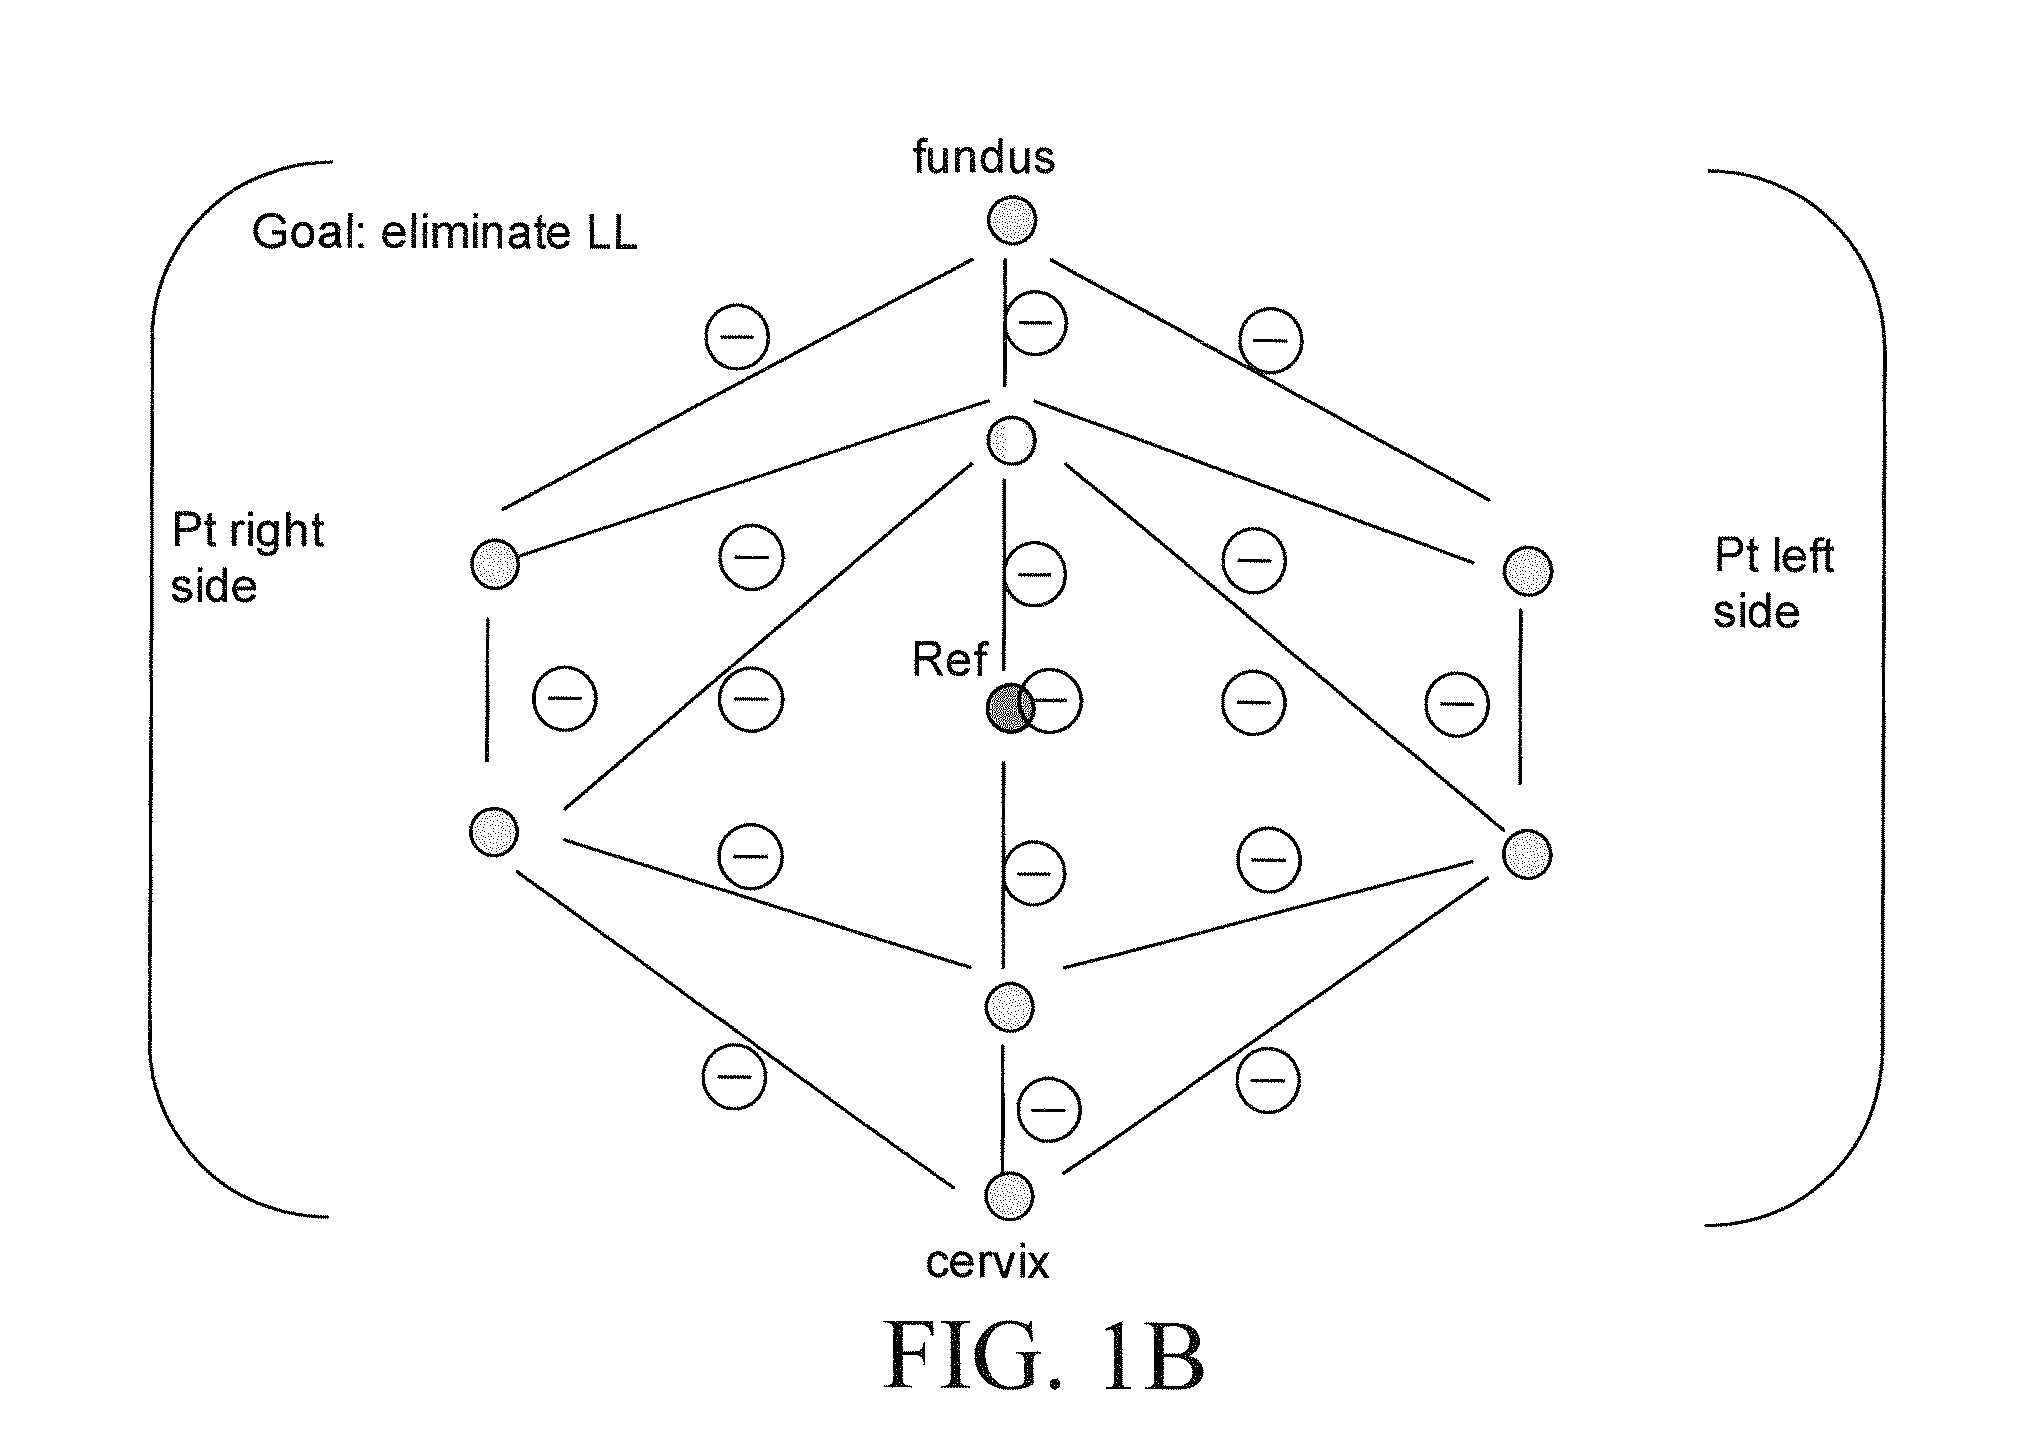 System and Method for Analyzing Progress of Labor and Preterm Labor